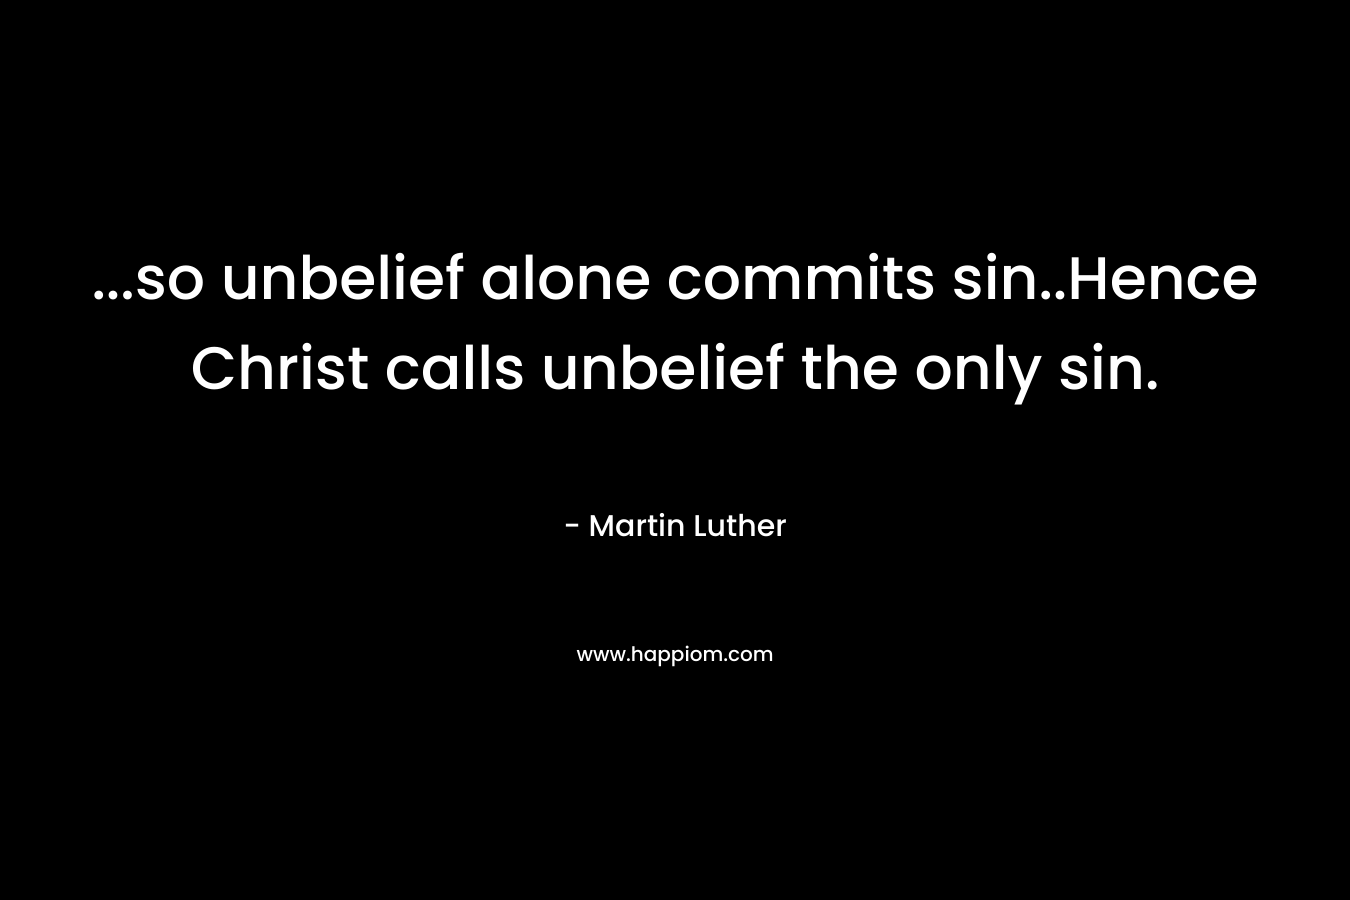 ...so unbelief alone commits sin..Hence Christ calls unbelief the only sin.